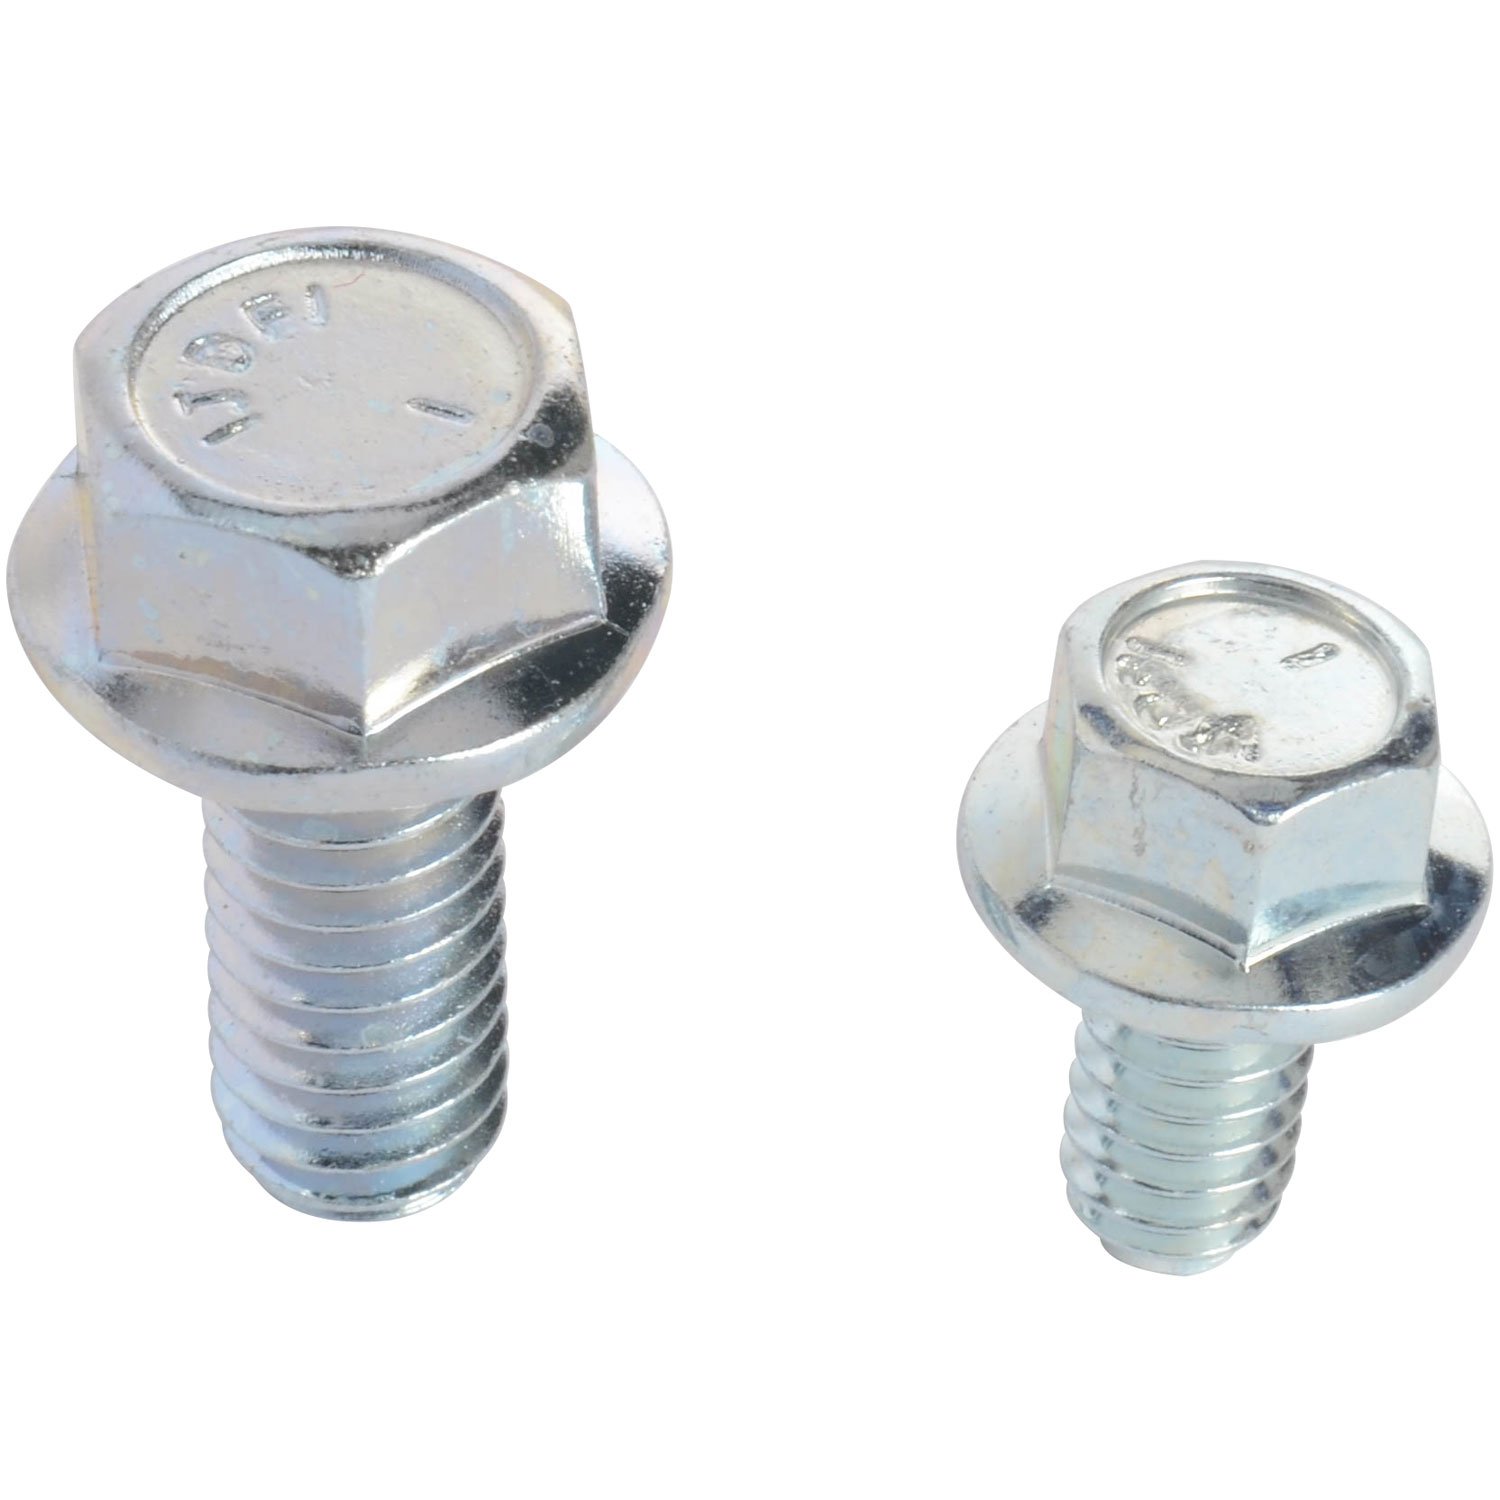 JEGS Performance Products 83300: Oil Pan Bolt Set Fits Small Block Chevy,  Chevy 90-degree V6  Oldsmobile V8 JEGS